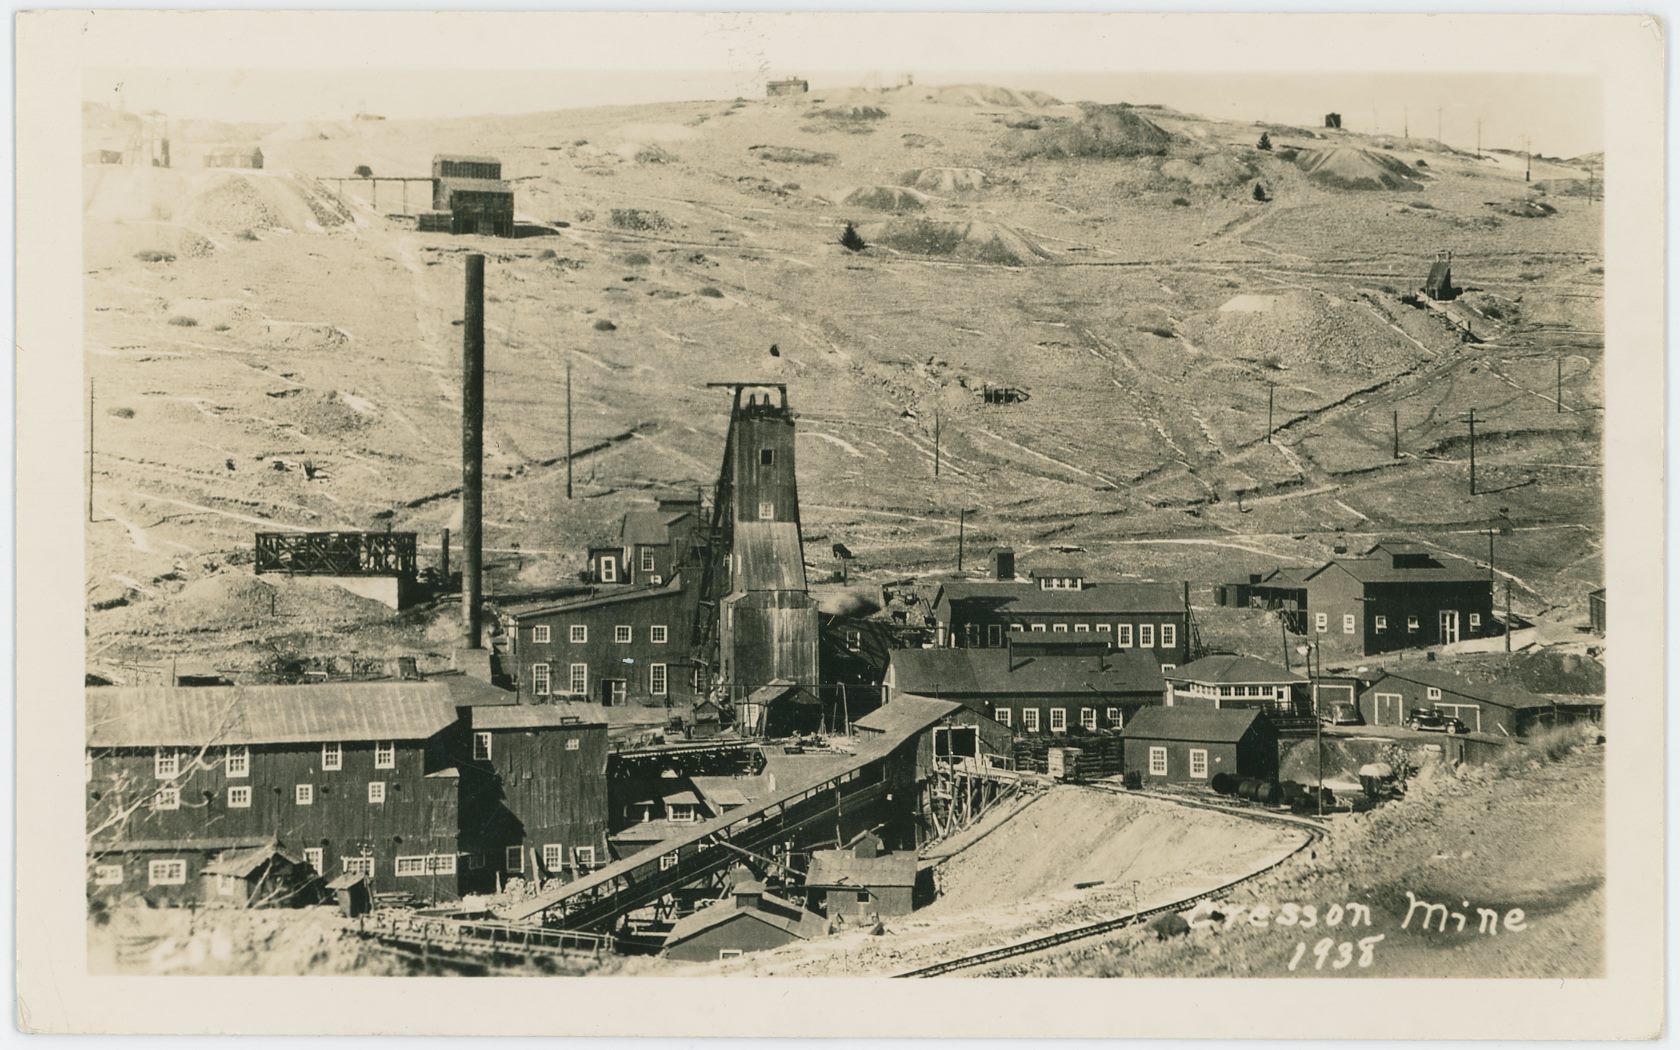 This is the 8th postcard I've seen (as of July 21, 2018) using the base image this is from, this is one of those editions where the text 1938 appears under the words 'Cresson Mine' in lower right. Raven Hill is in the background and sorry, no, I've yet to figure out what mine has that Ore-House seen near upper left, seen just above top of the Cresson Smokestack.